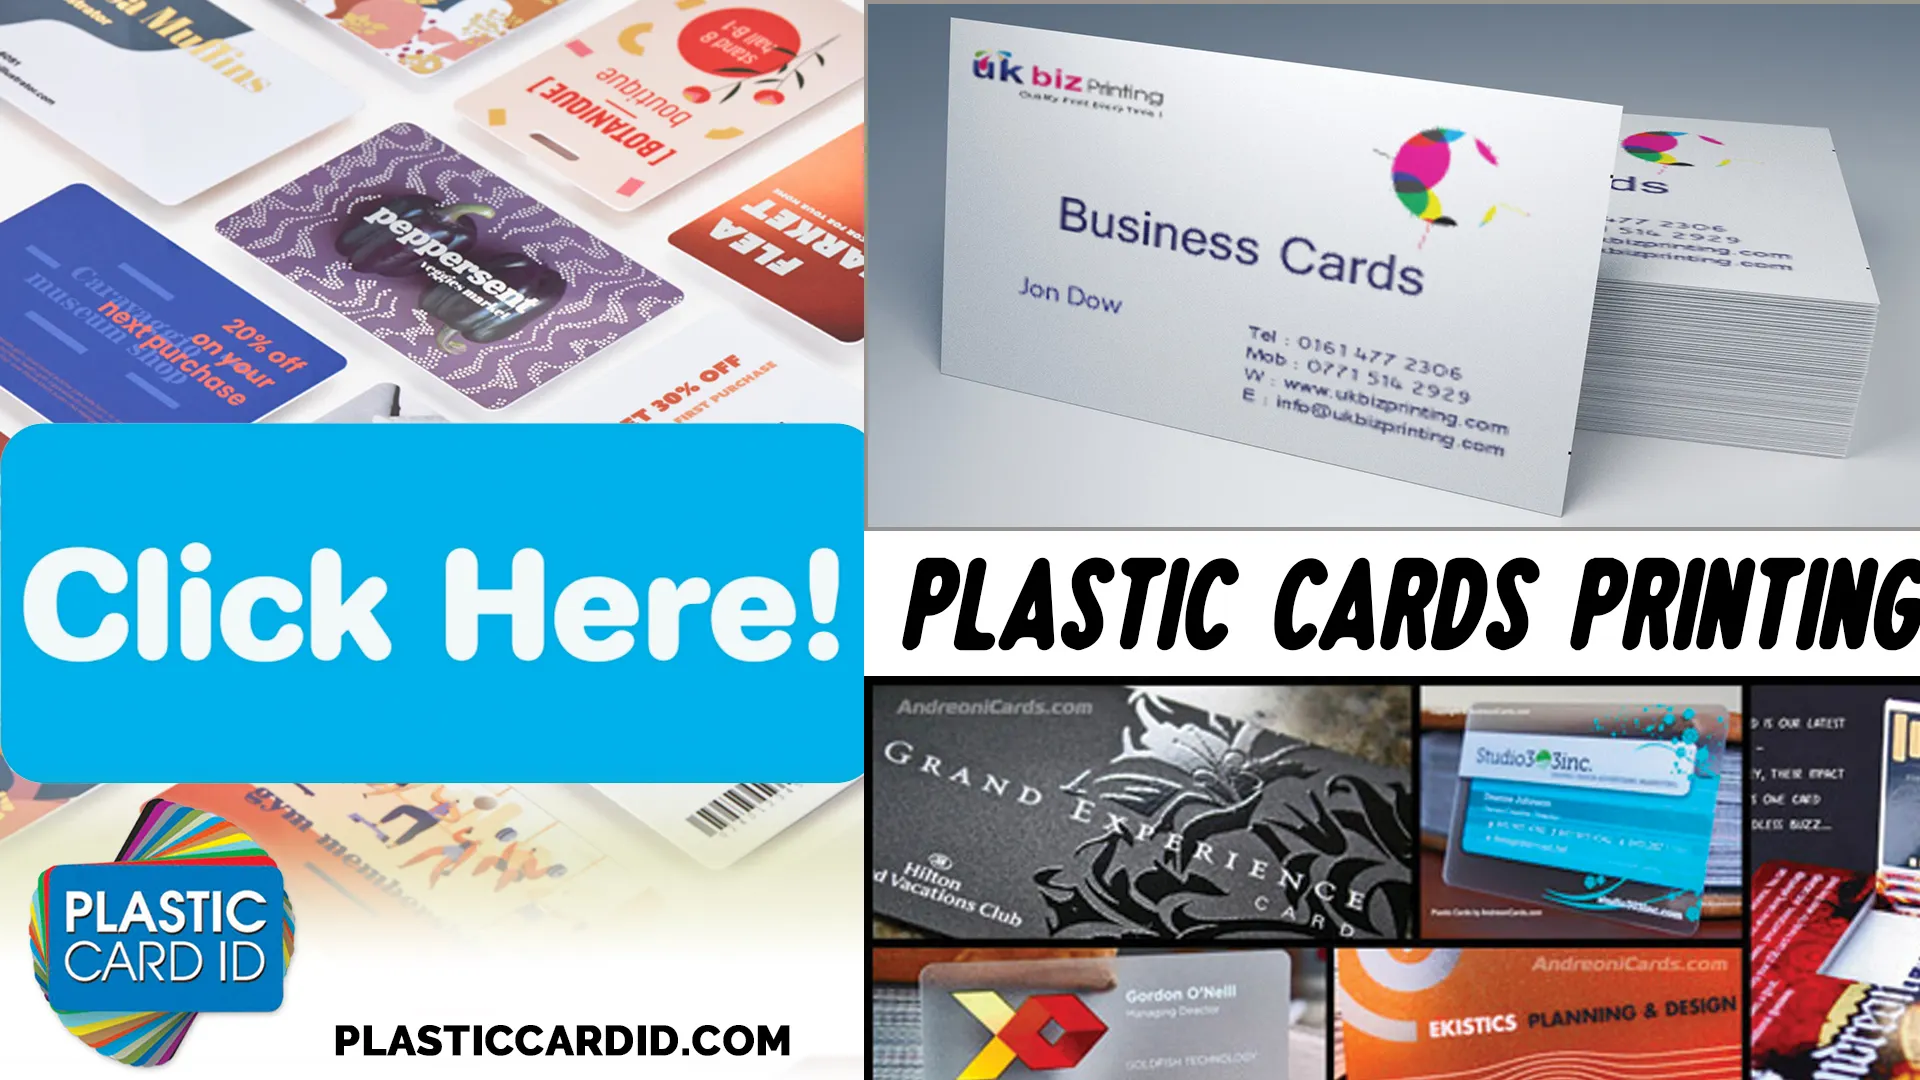 Welcome to the World of Flexible Plastic Card Solutions